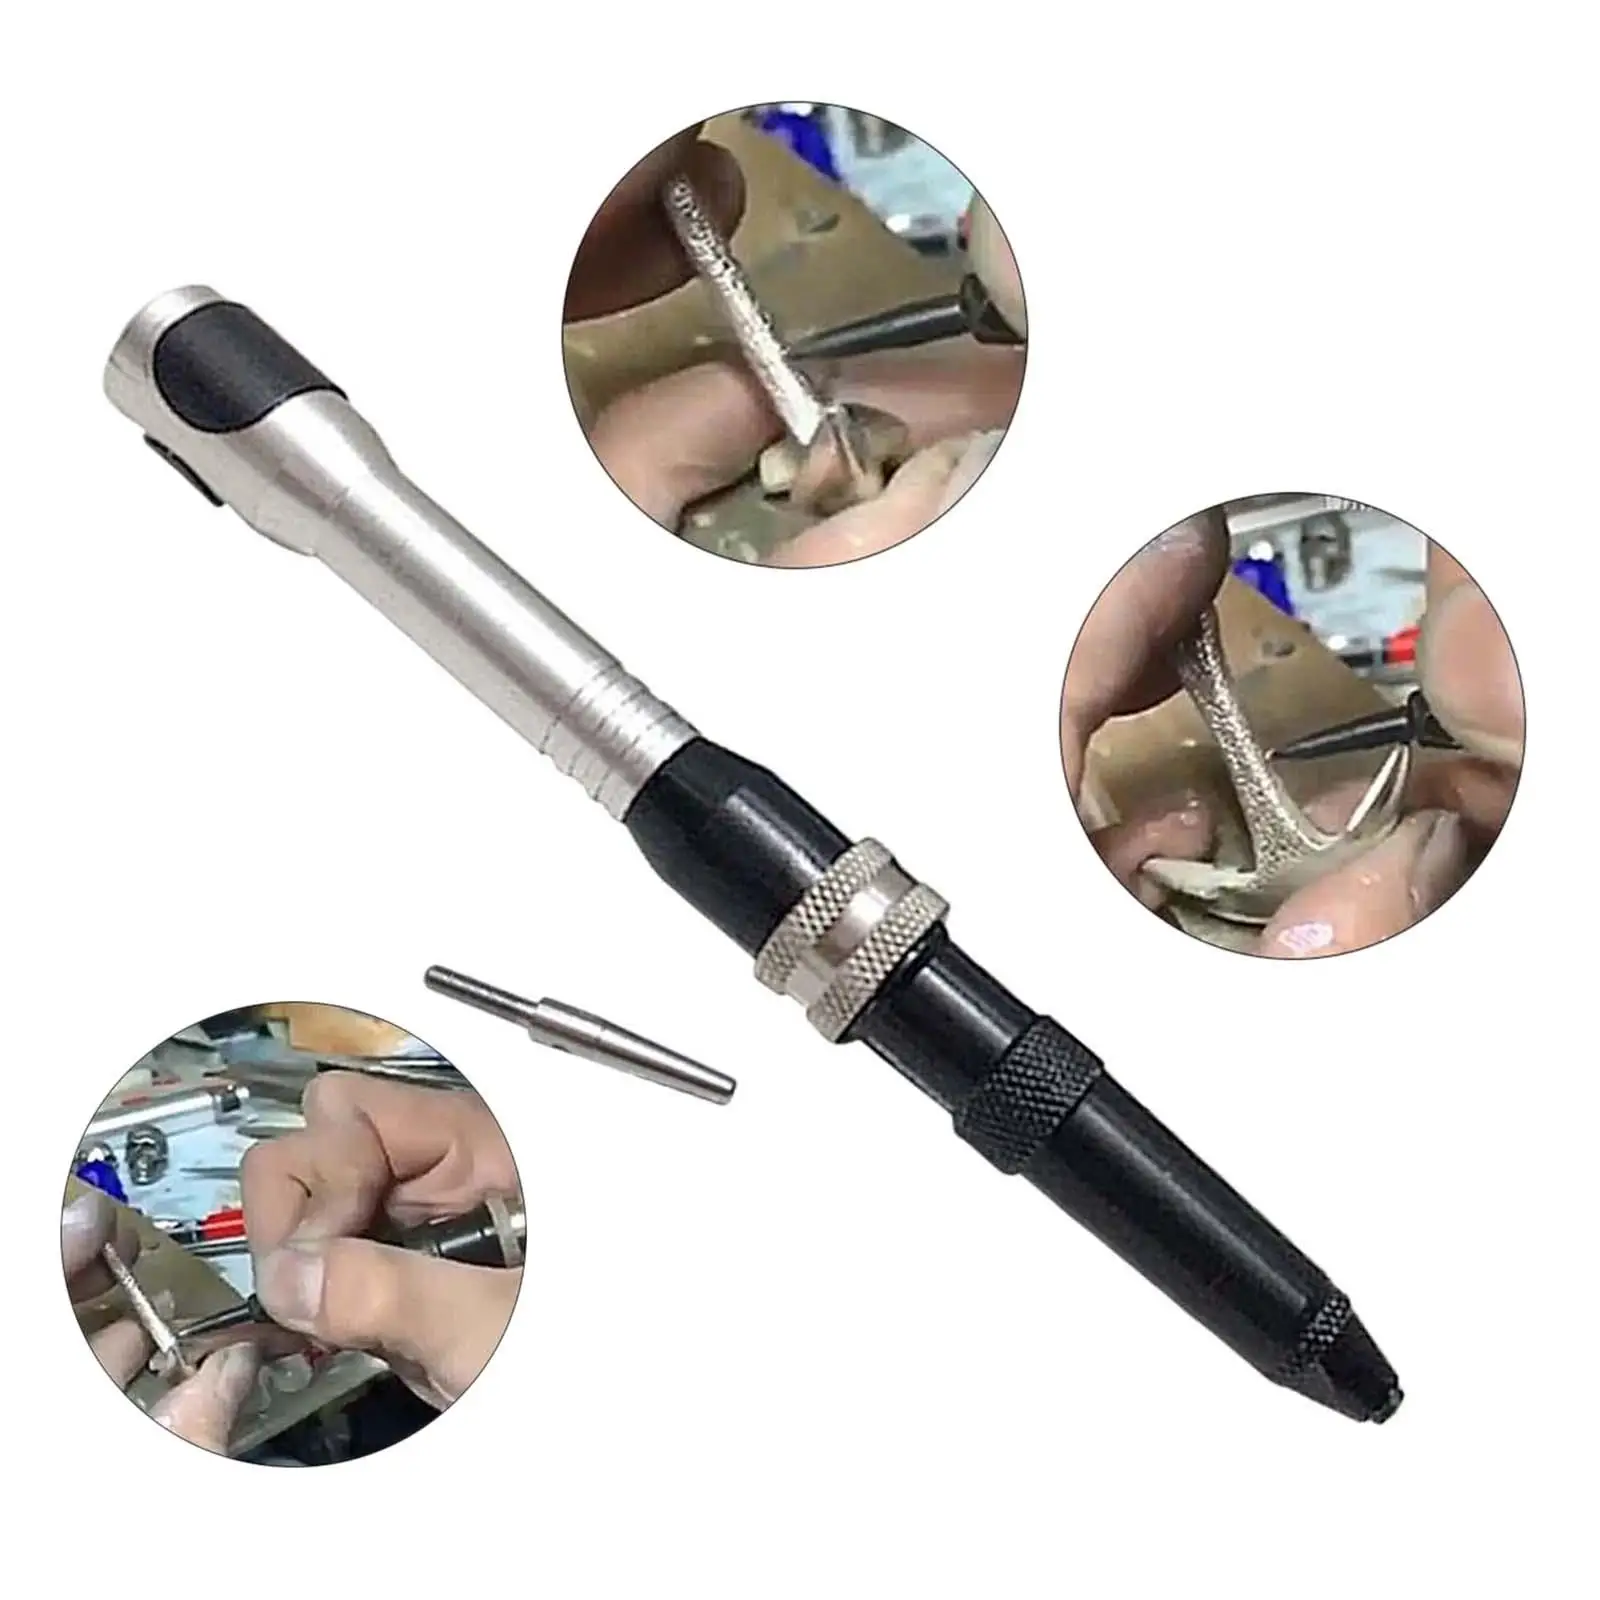 Handle Crafting Handpiece Low Vibration Slow Heating Bits   Shaft